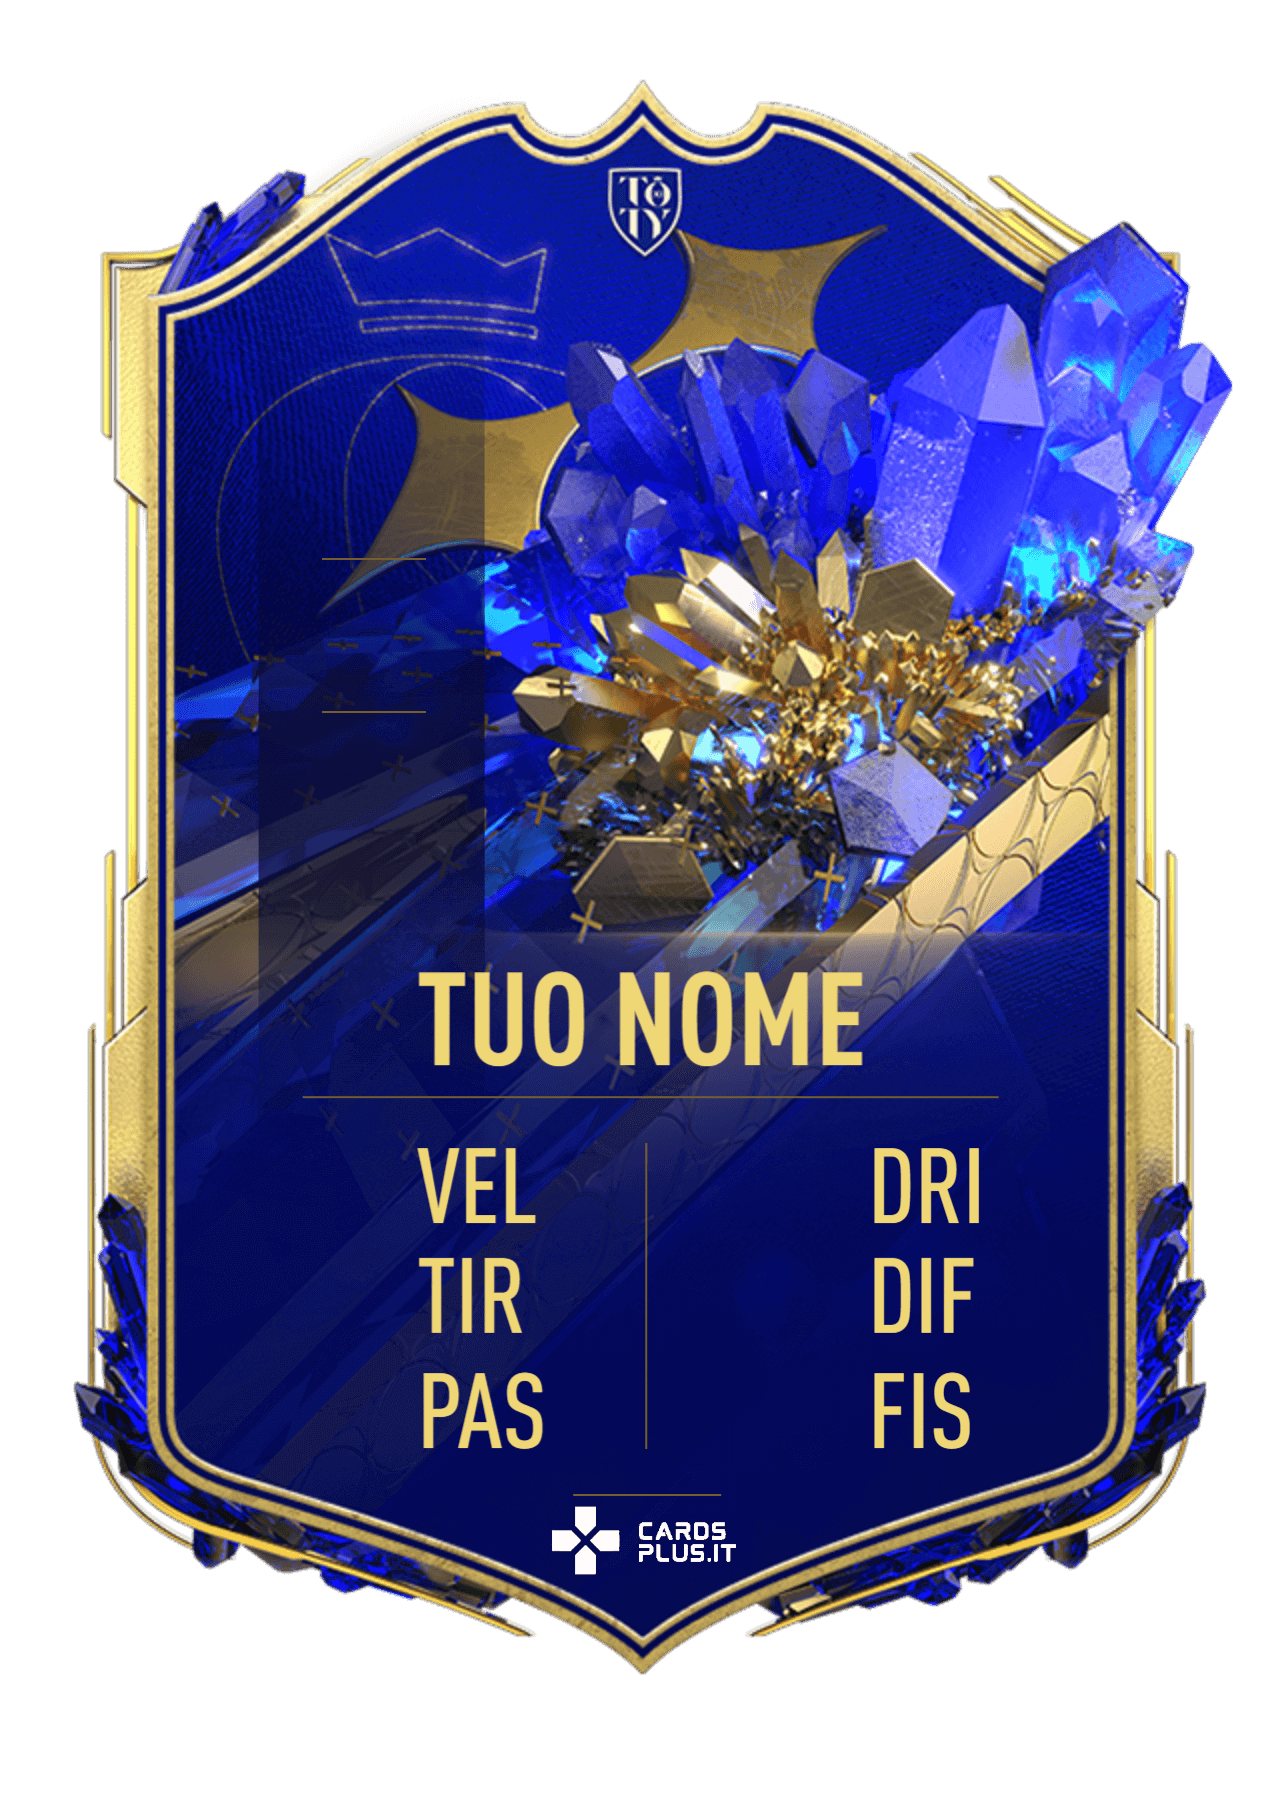 FIFA FUT 23 TOTY: Team of the Year official card design